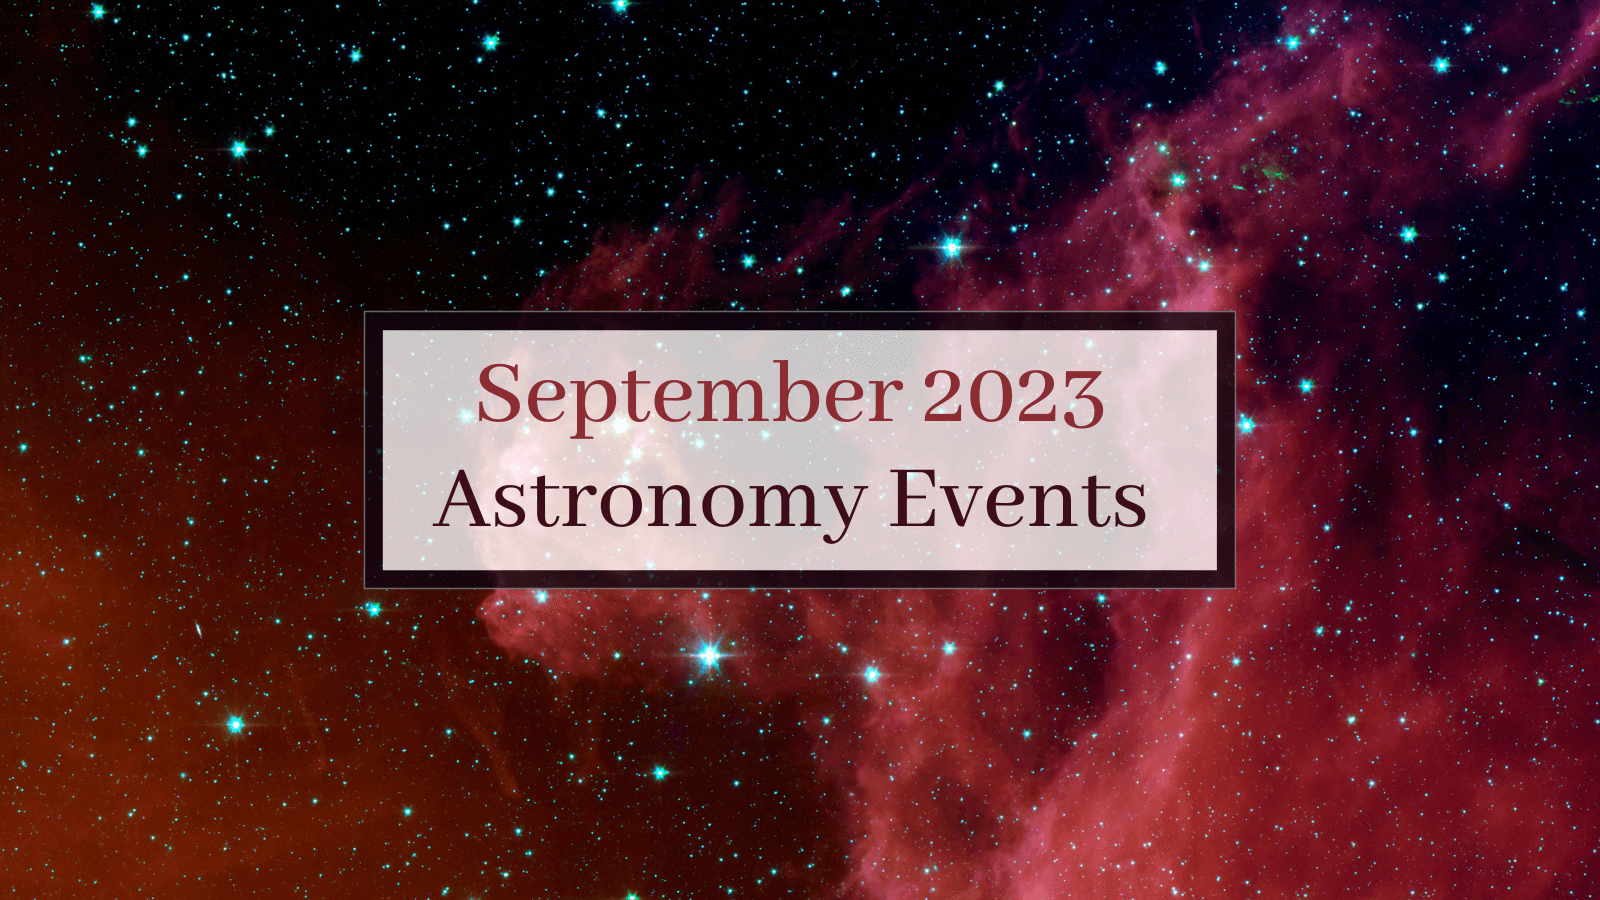 September 2023 Astronomy Events